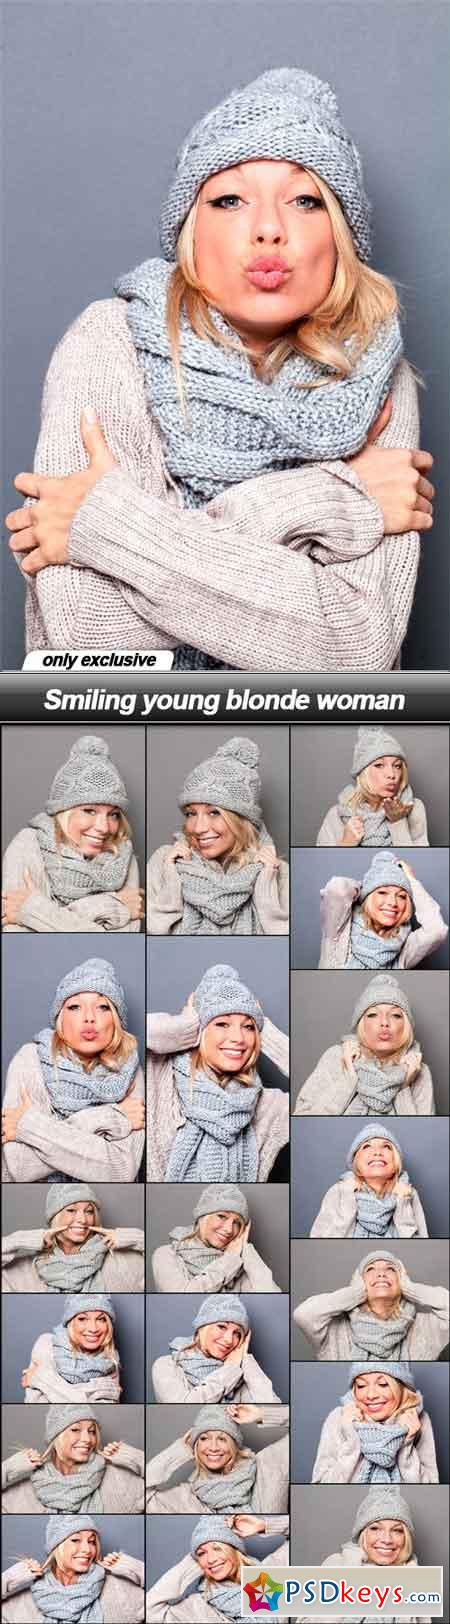 Smiling young blonde woman - 19 UHQ JPEG